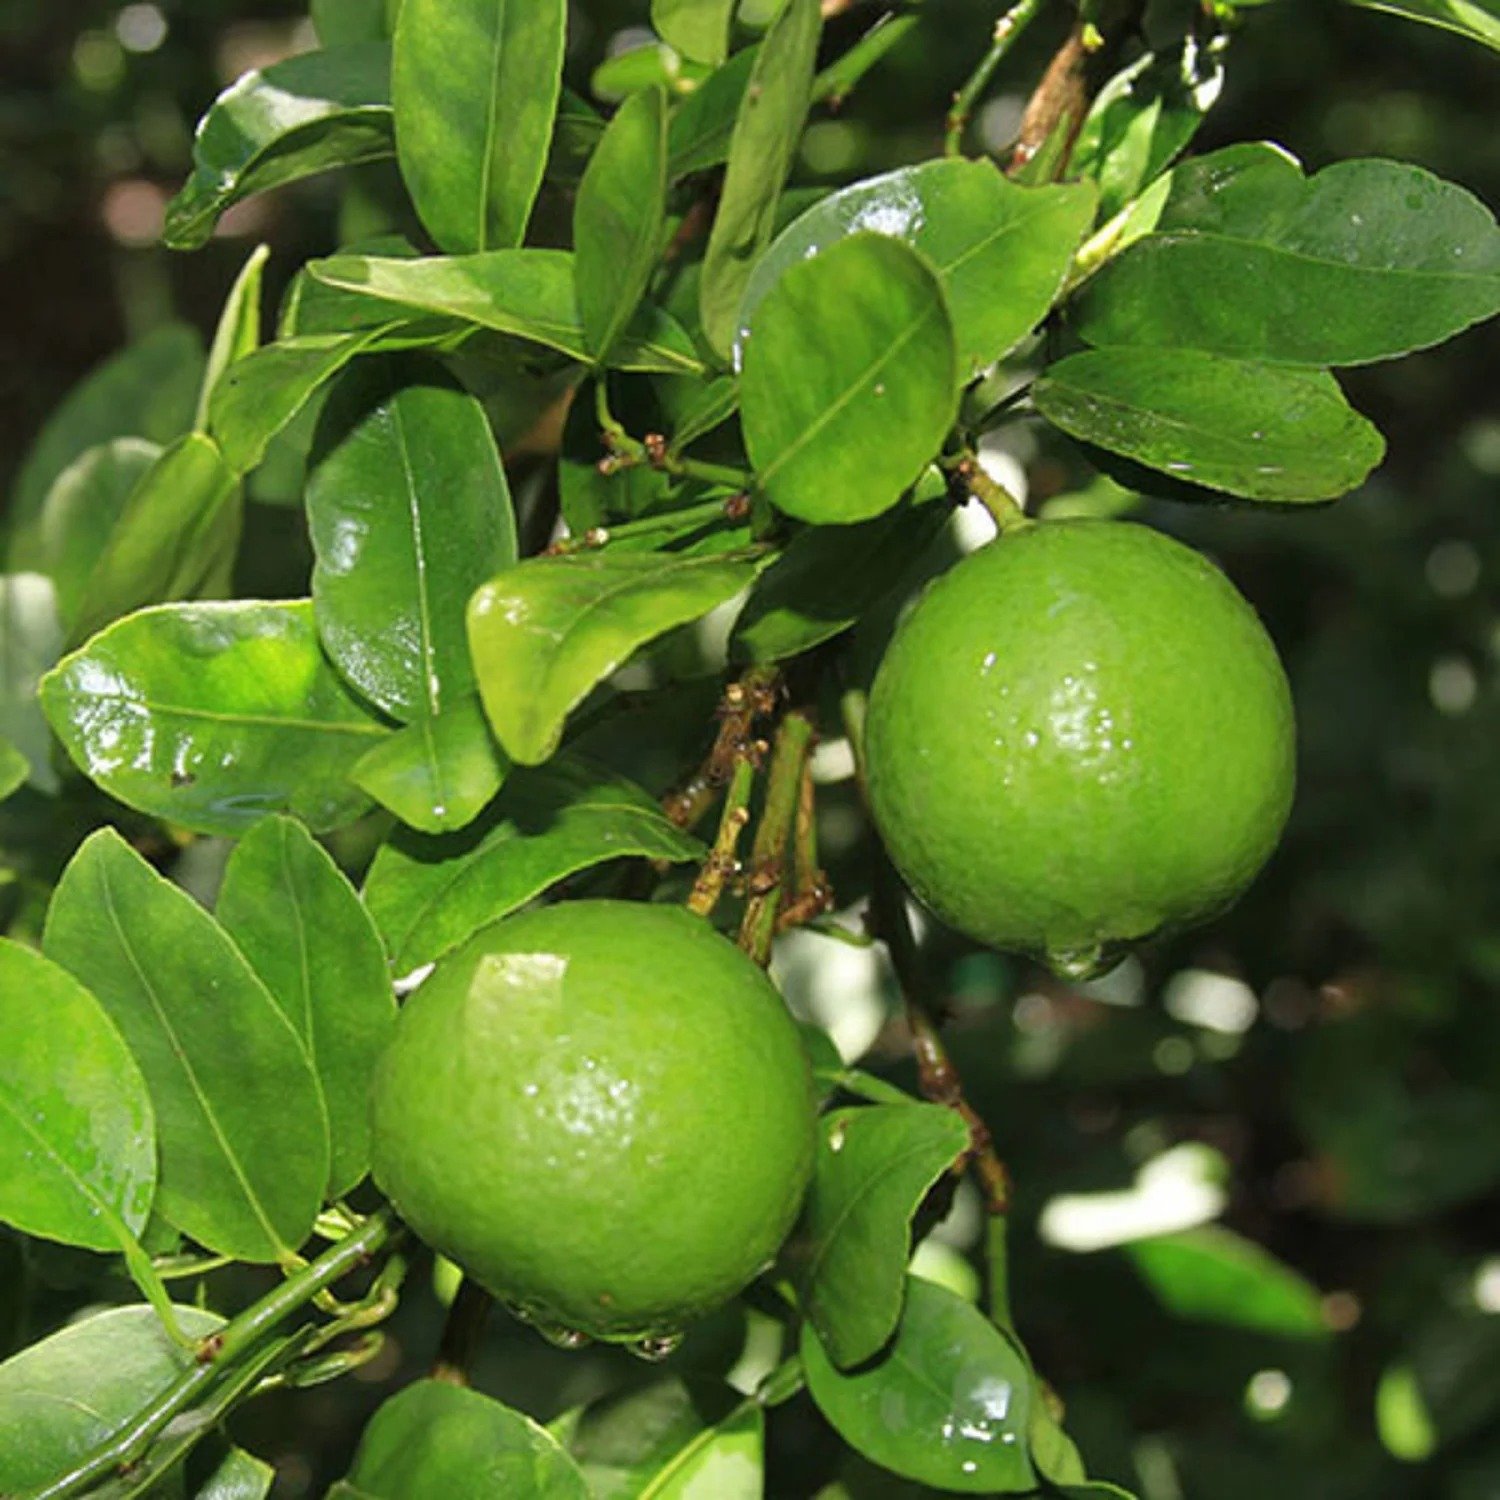 A Mexican Lime tree with lush green leaves and ripe fruit hanging from its branches.

